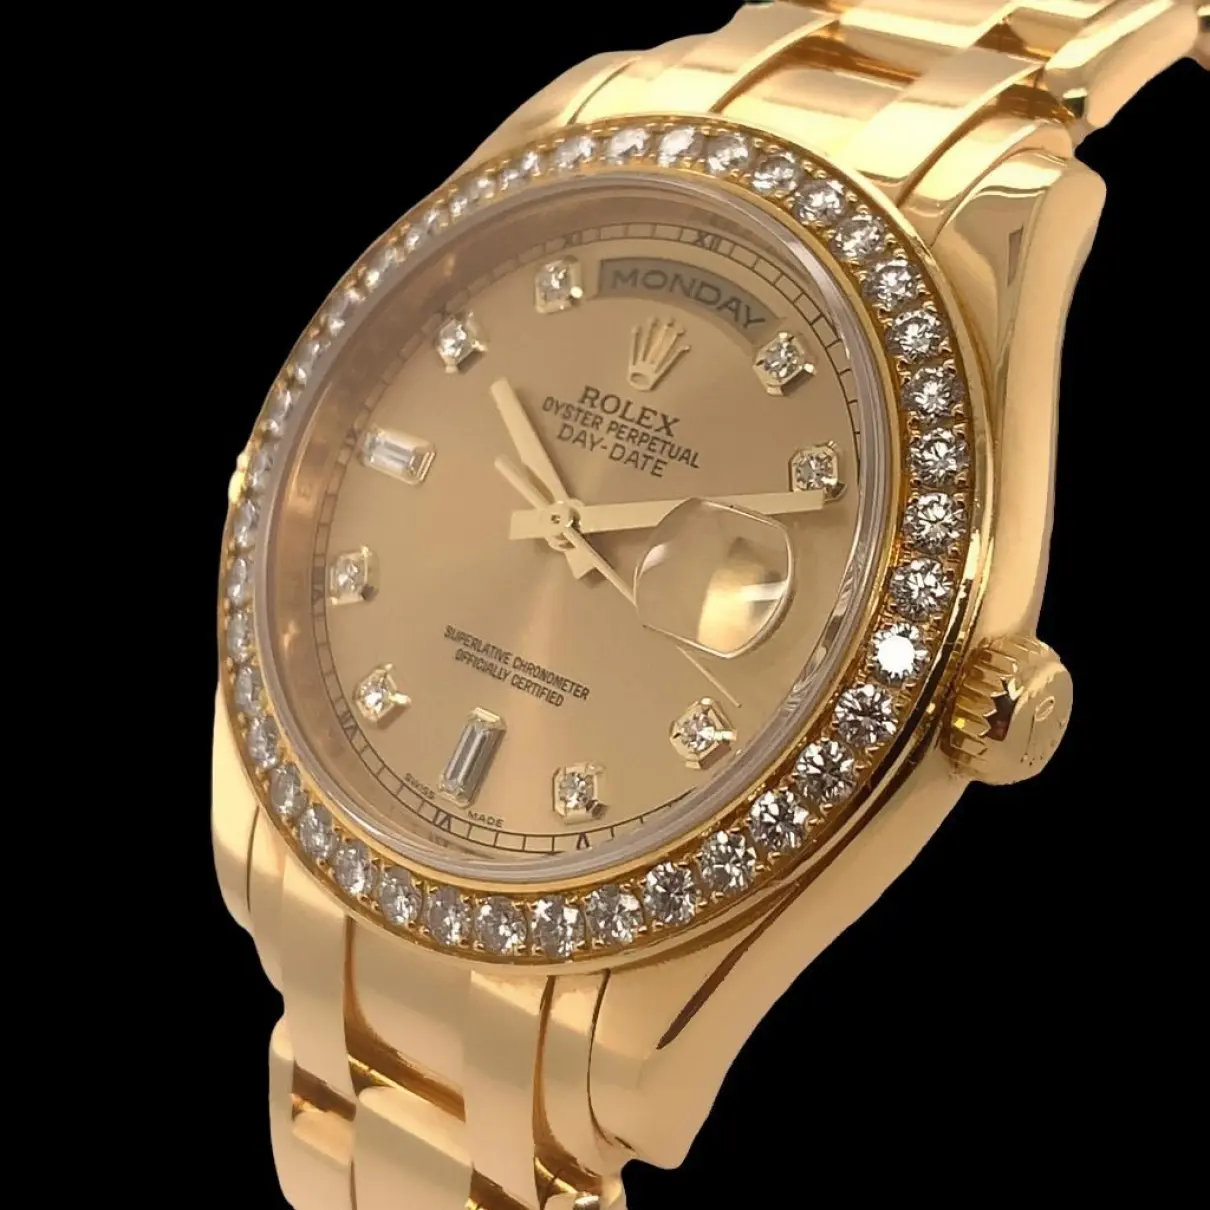 Day-Date yellow gold watch Rolex